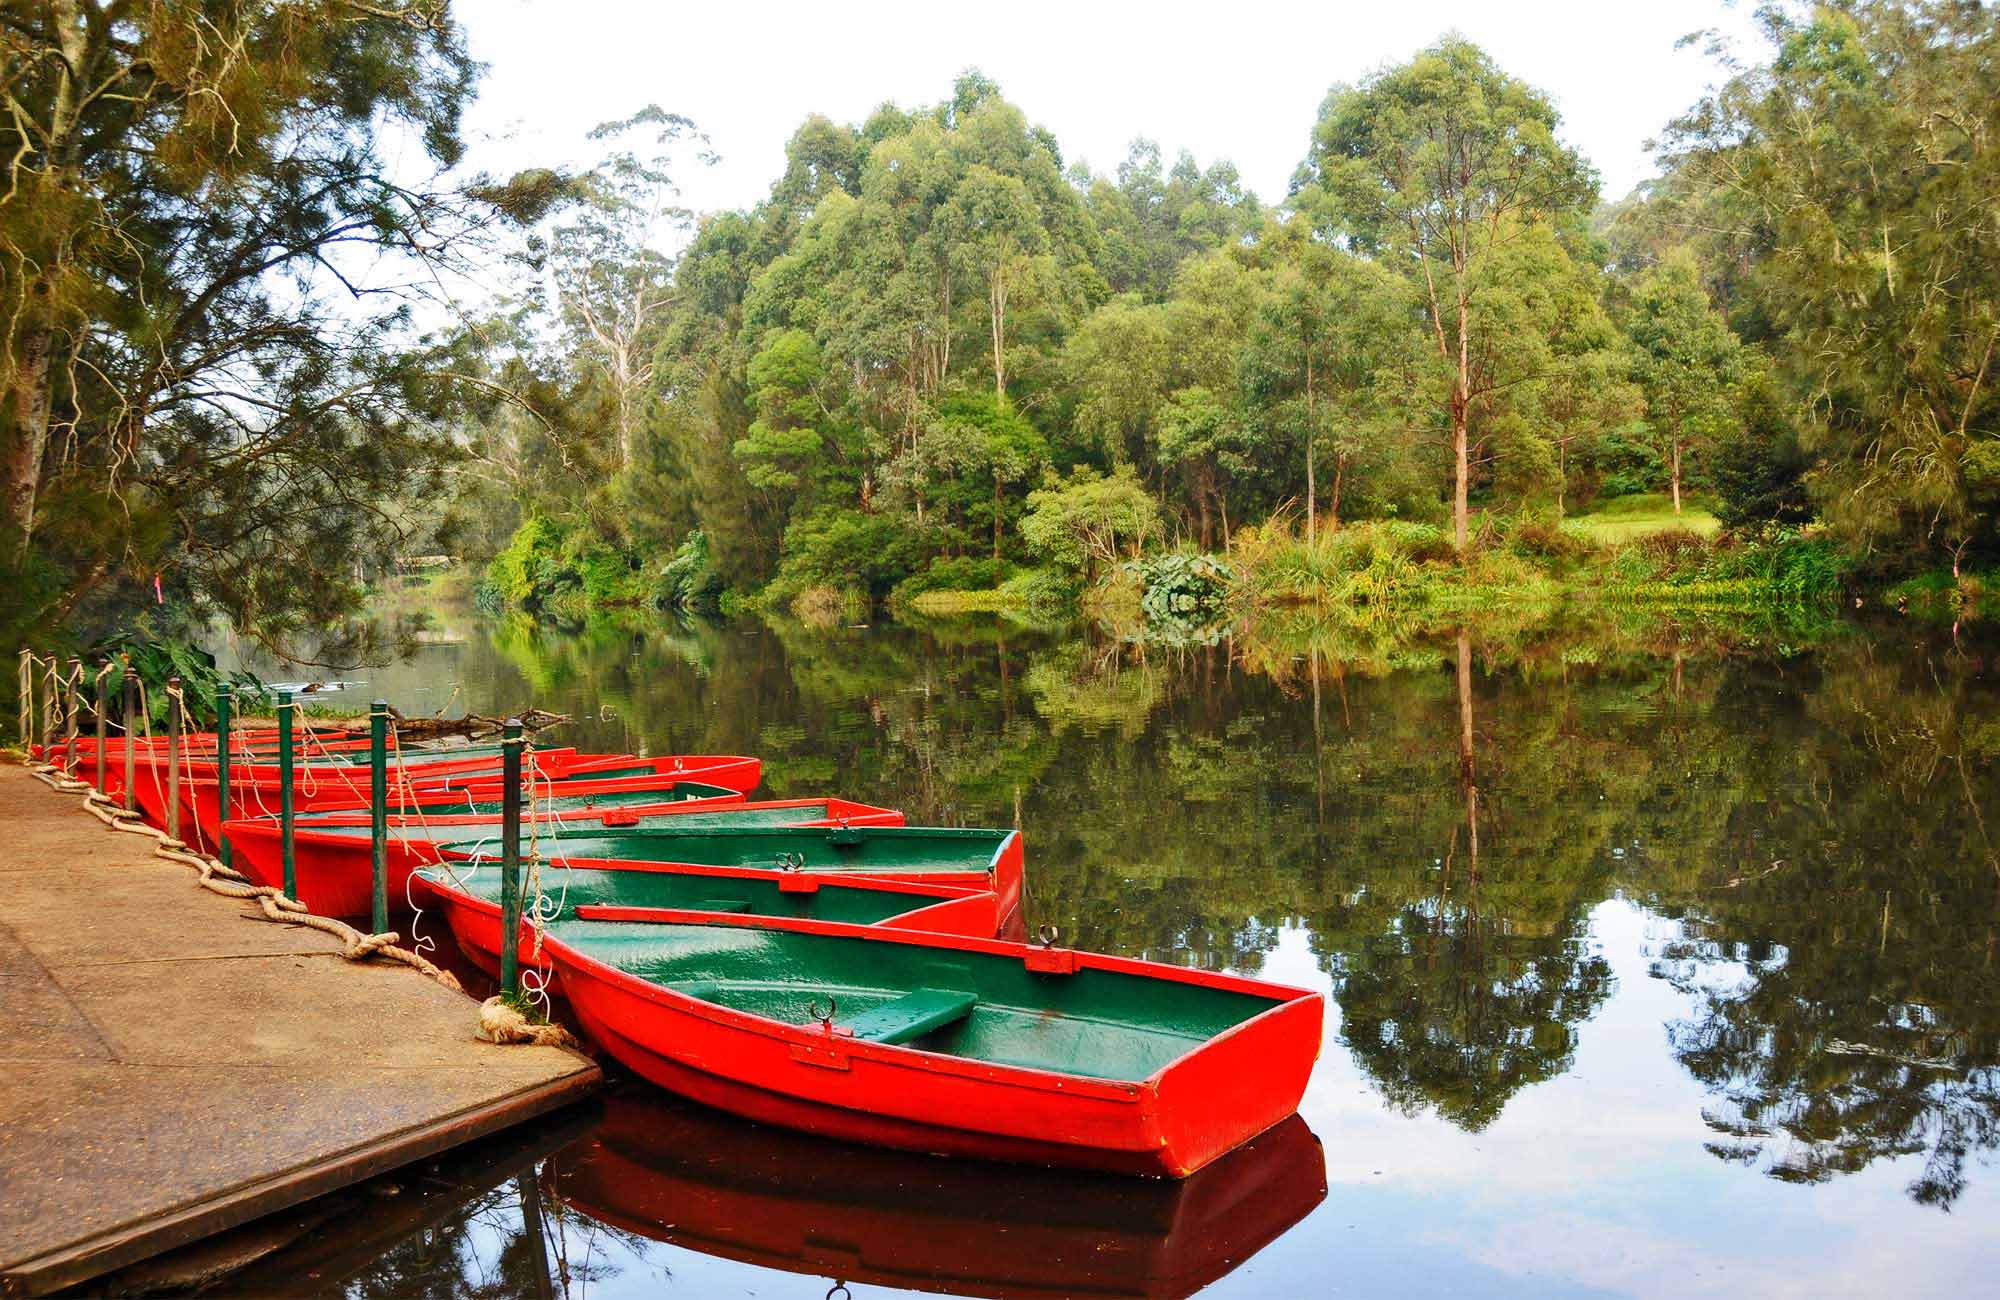 Red row boats moored at the boatshed, Lane Cove National Park. Photo: Kevin McGrath